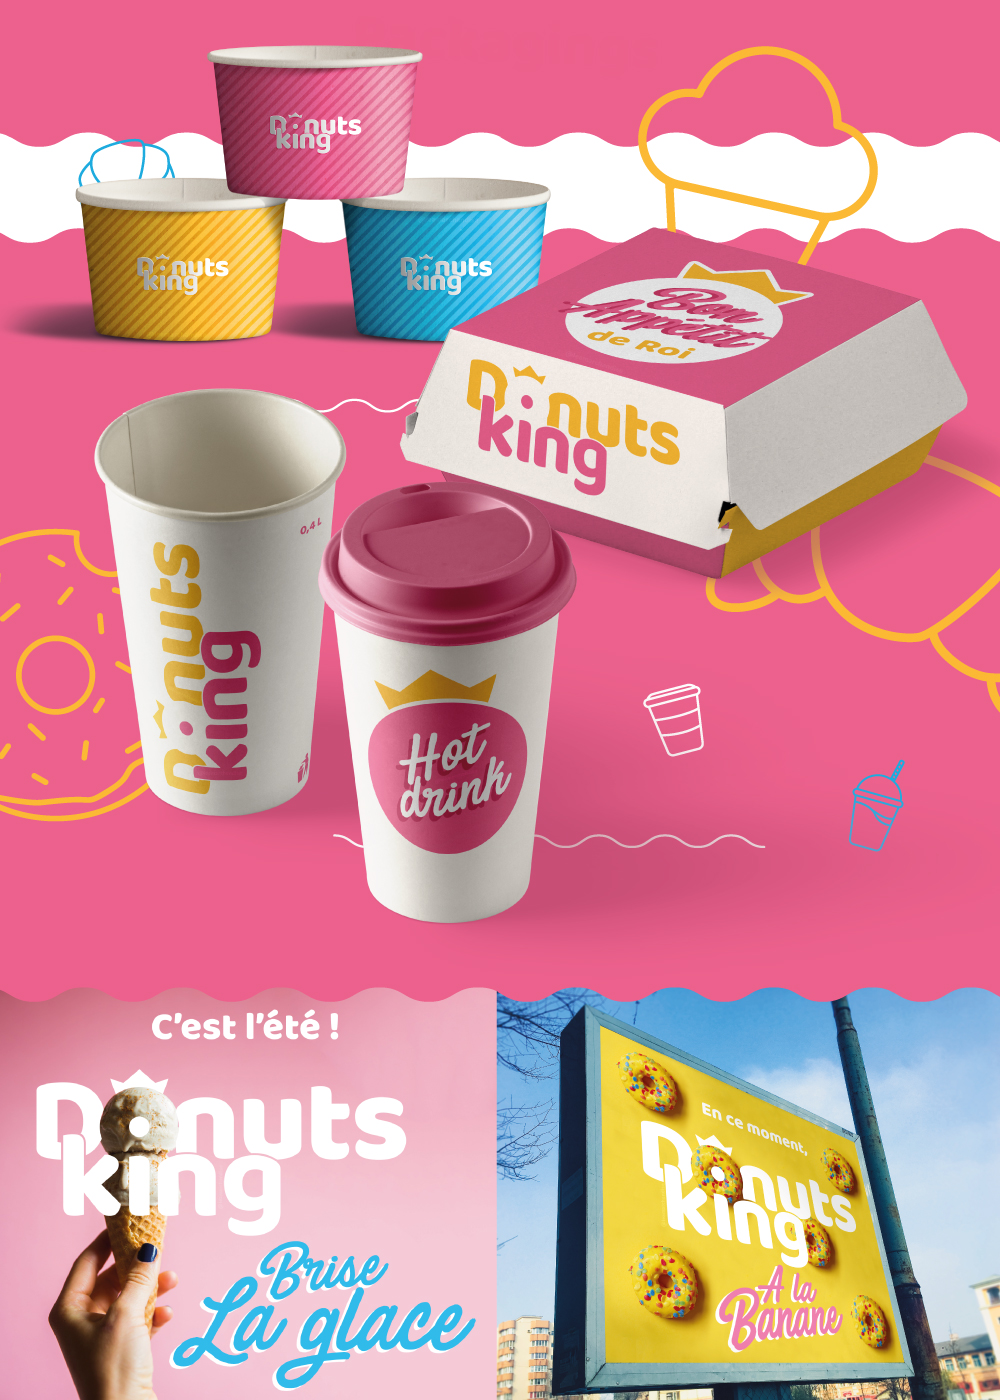 Donuts King partie 2